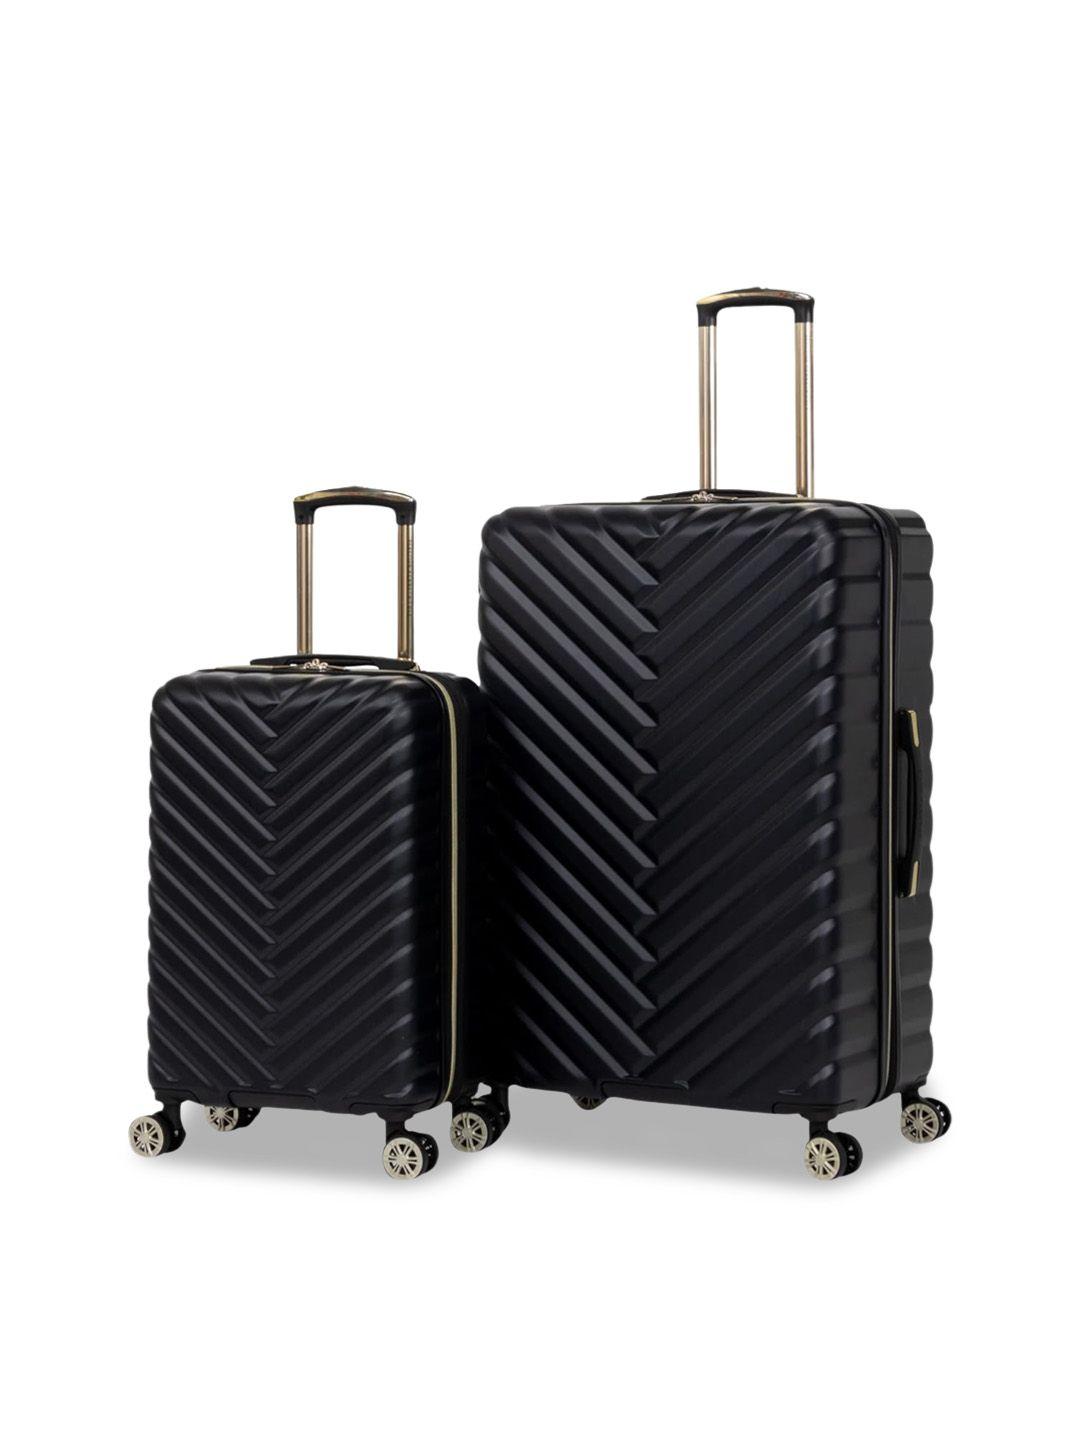 kenneth cole set of 2 textured hard-sided trolley bags